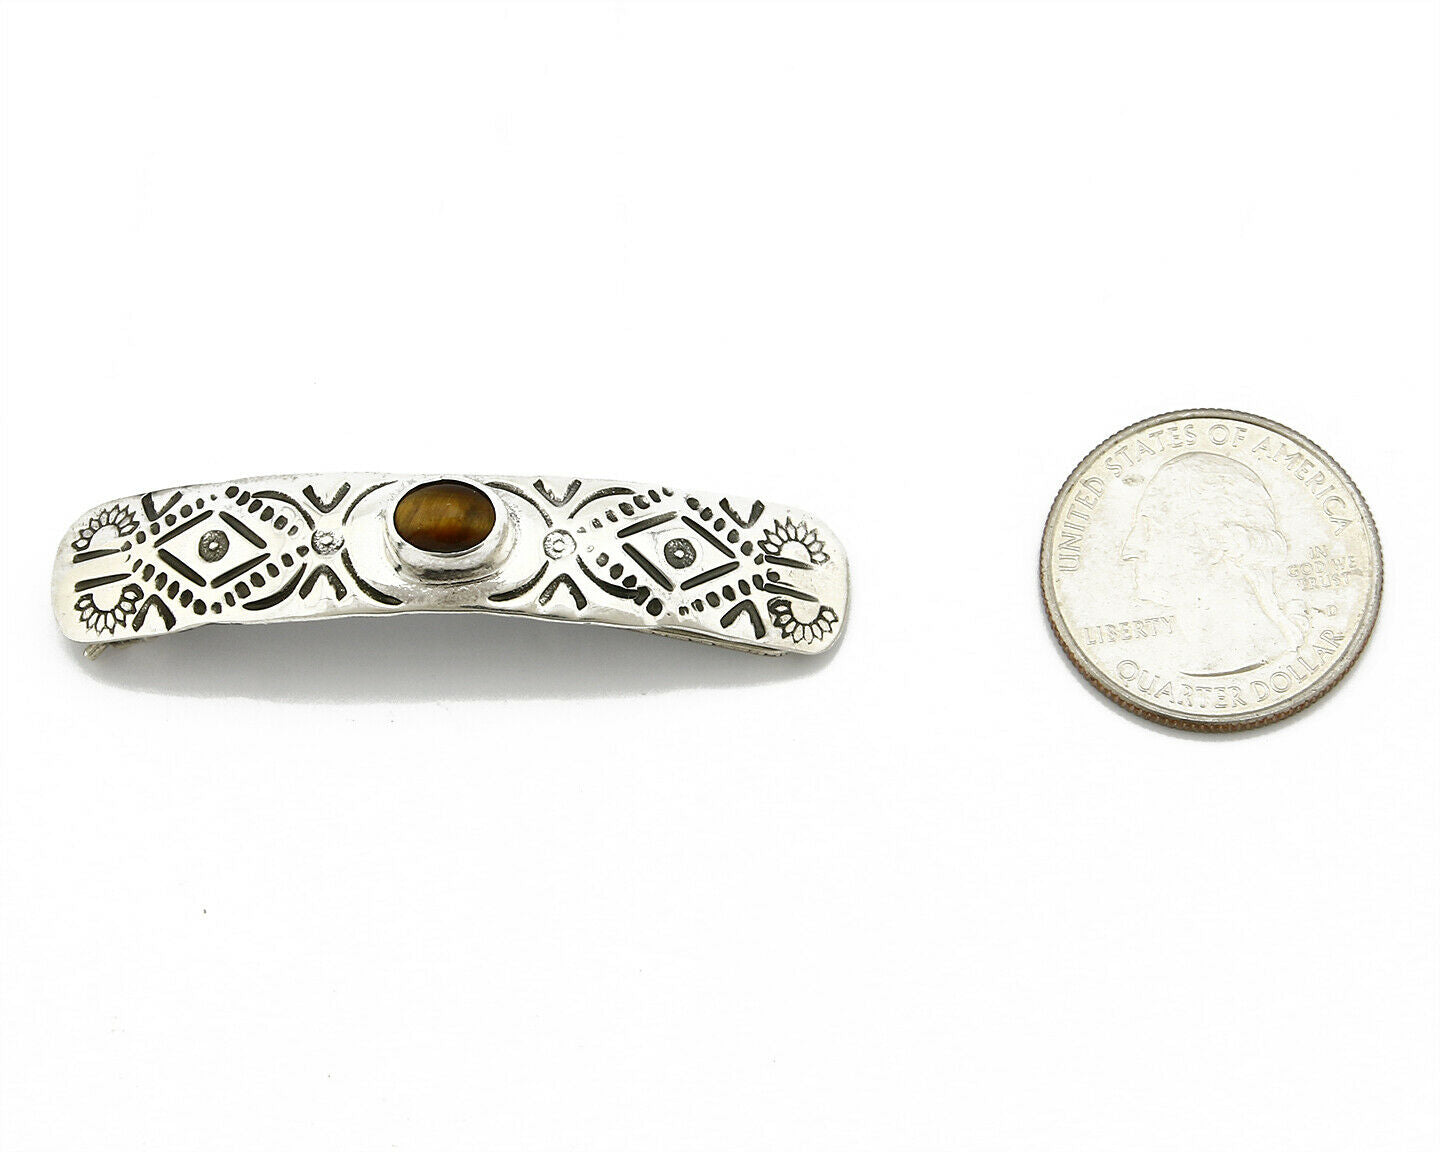 Navajo Tigers Eye .925 SOLID SILVER Hand Stamped 12mm Wide Barrette Hair Clip